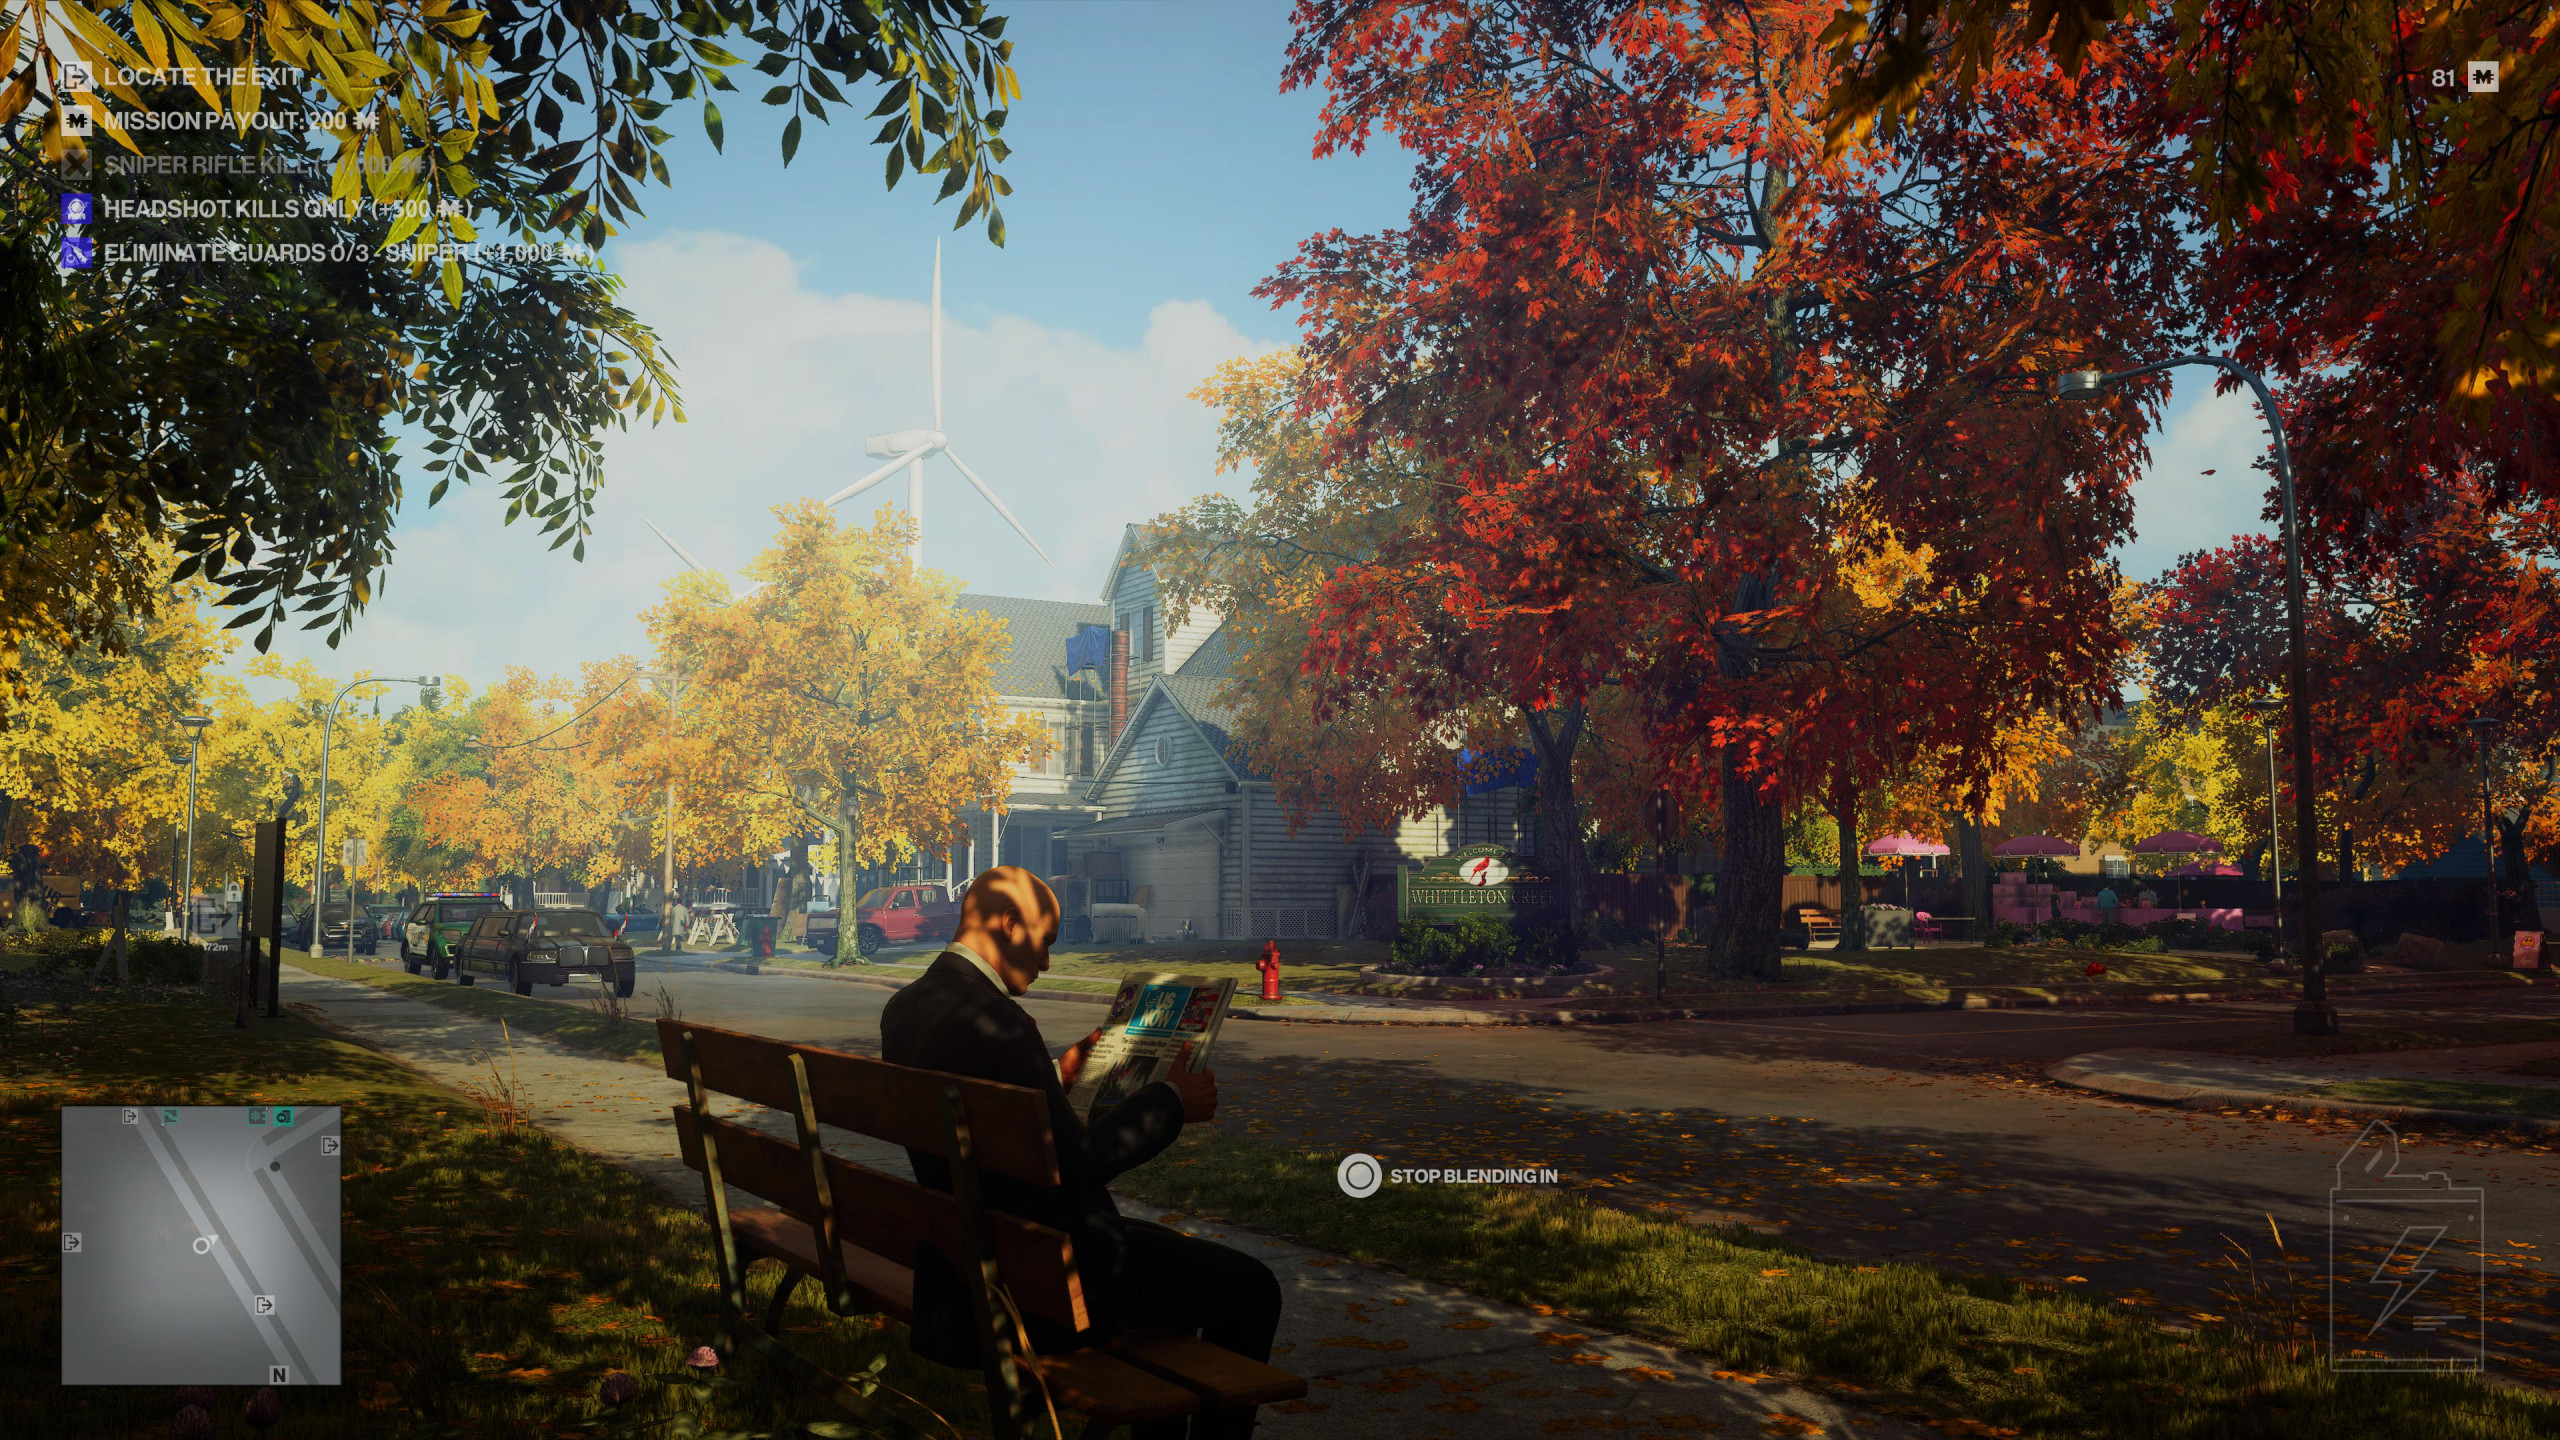 Agent 47 sits on a park bench in a on a suburban street in a residential area reading a newspaper in order to blend in during a Hitman Freelancer mission. It is autumn time as the trees around have various colours of red yellow and orange foliage.